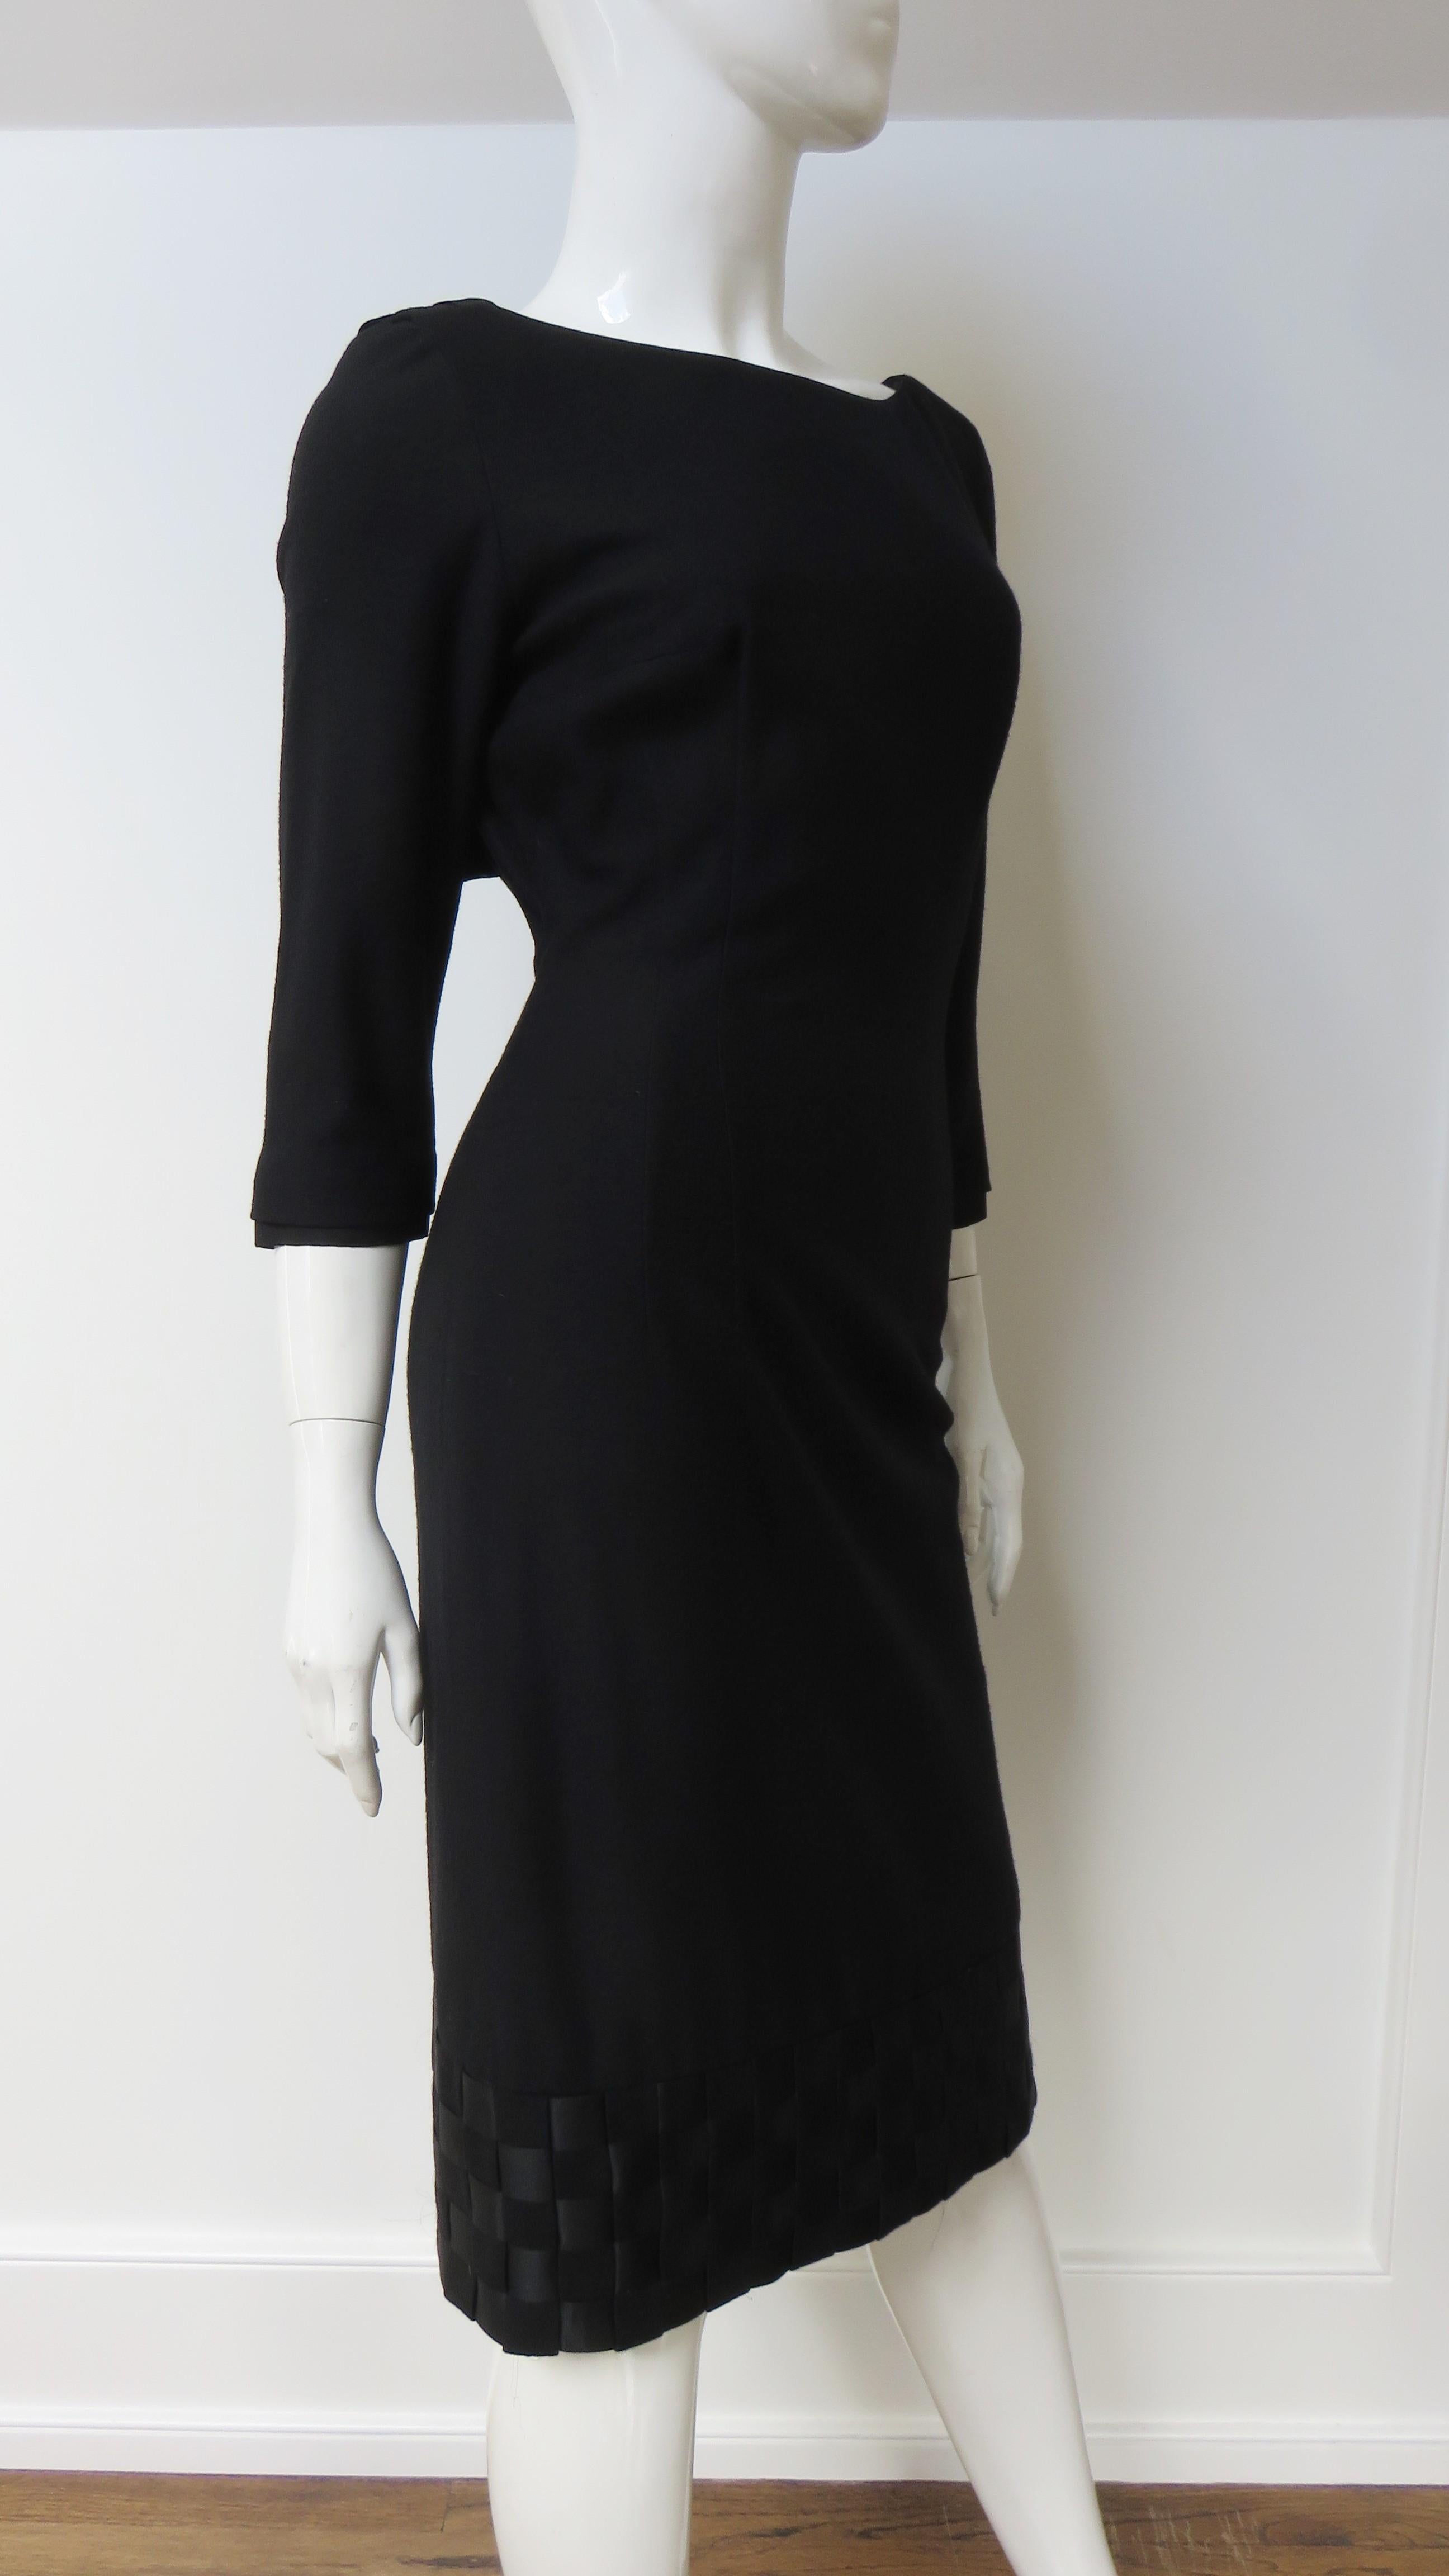 Mr Blackwell Woven Hem and Collar 1950s Dress For Sale 6